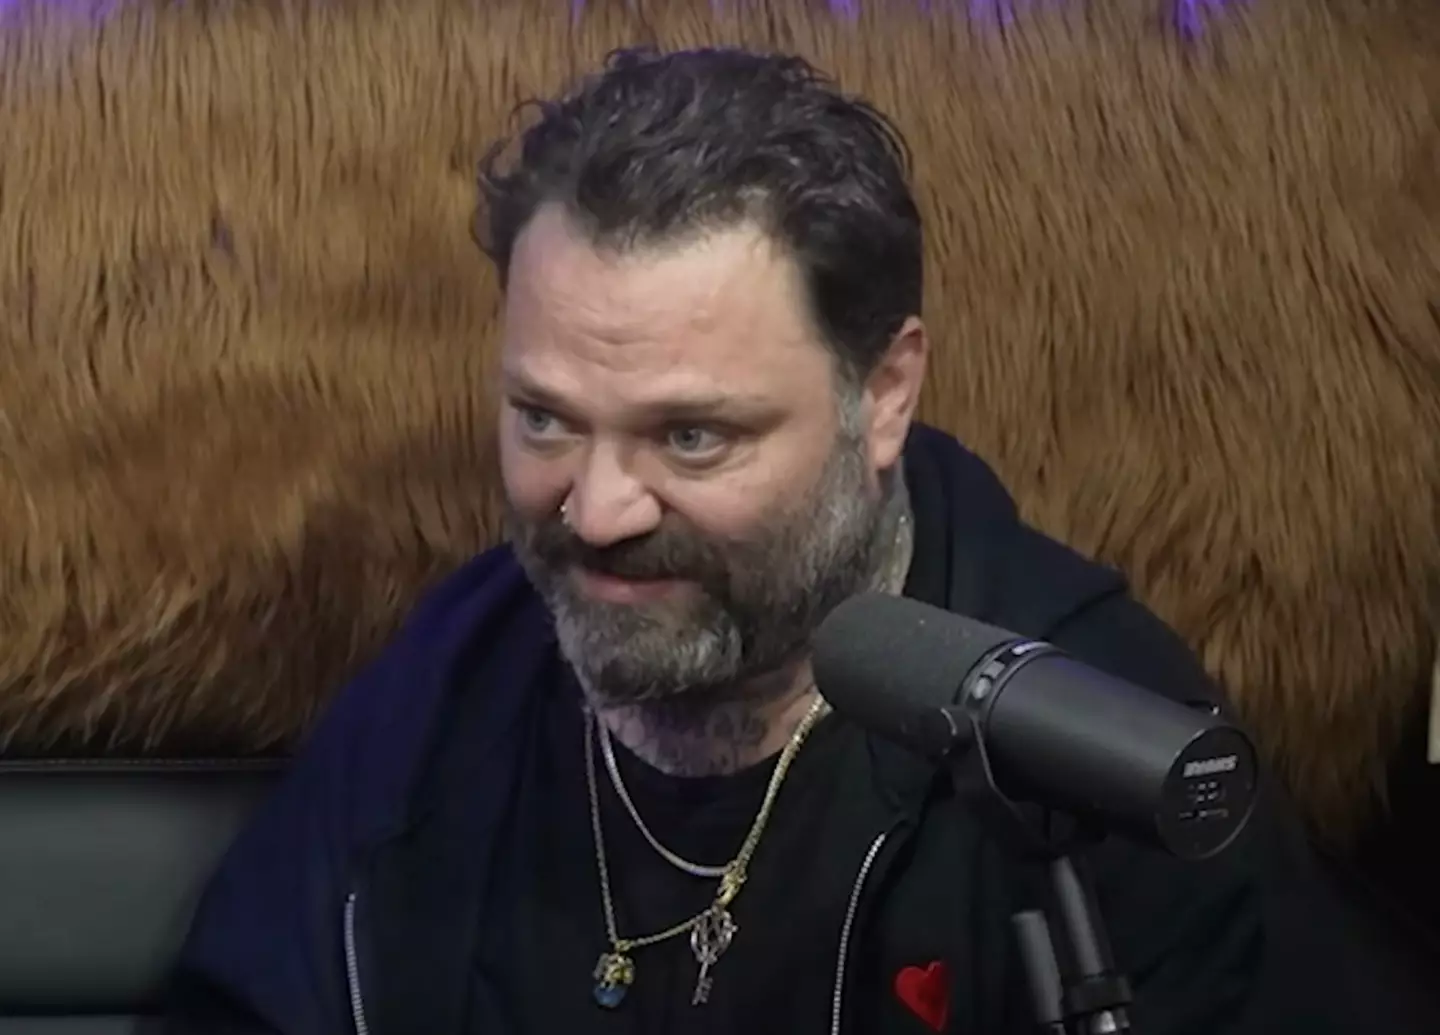 Bam Margera almost died, he says.